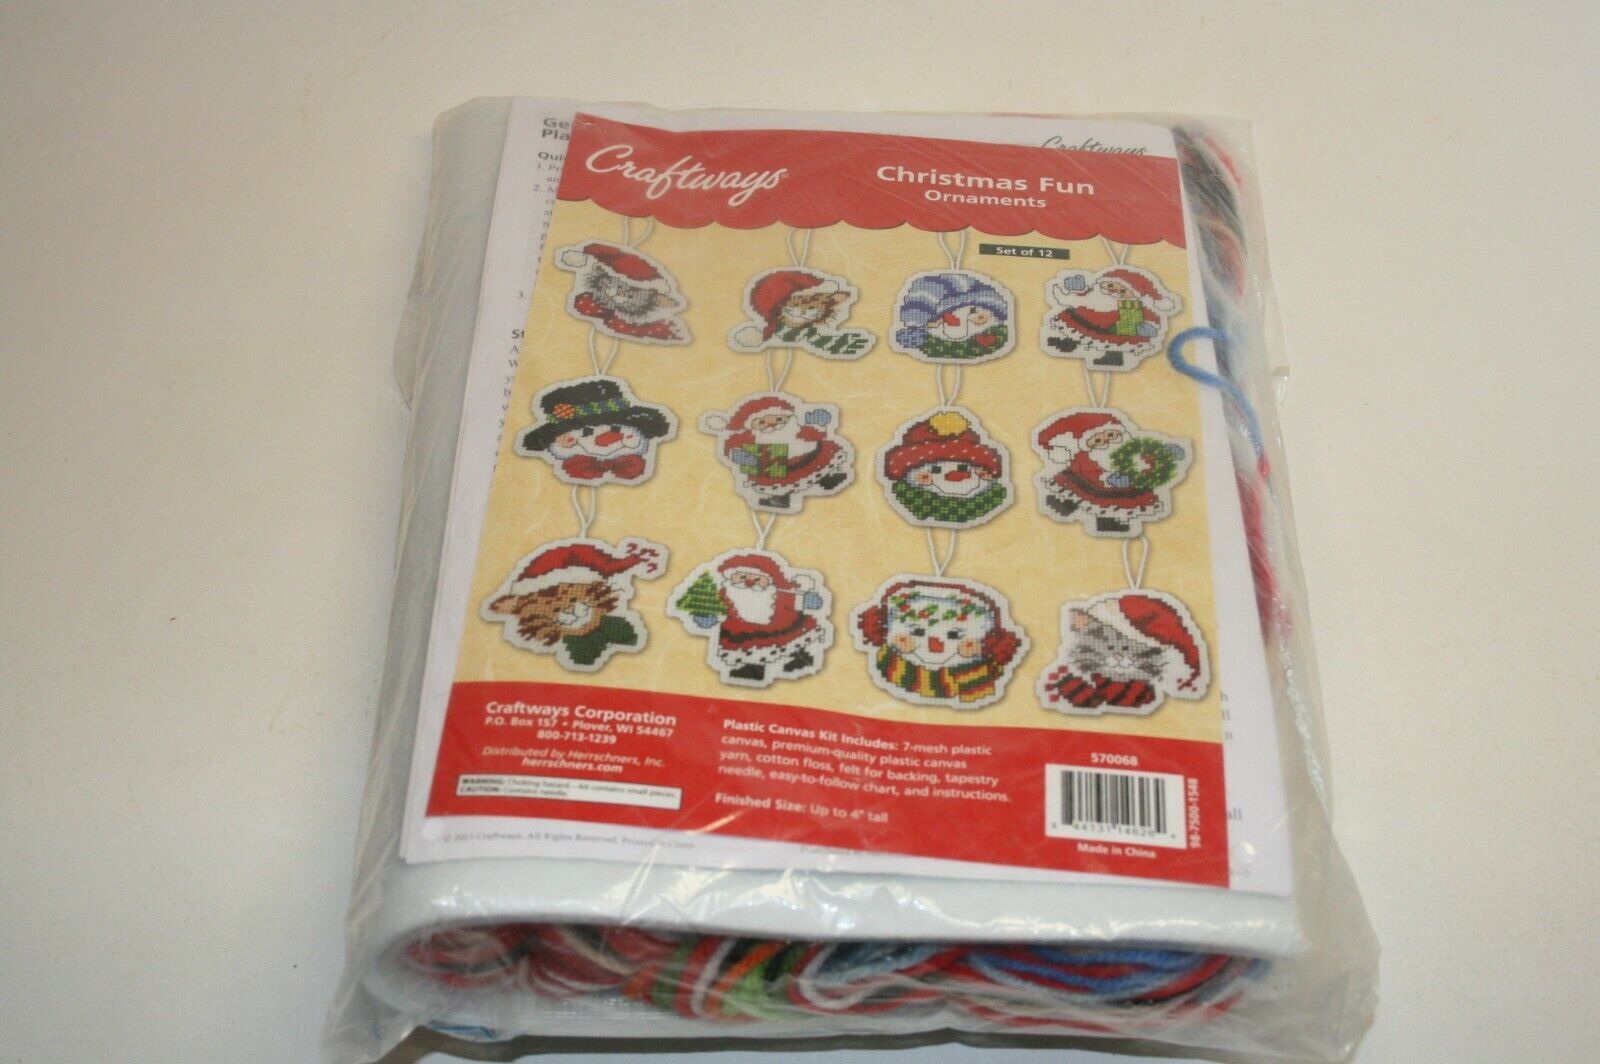 Craftways #570068 Set of 12 Christmas Fun Ornaments Up to 4" Tall Needlework NOS - $9.89